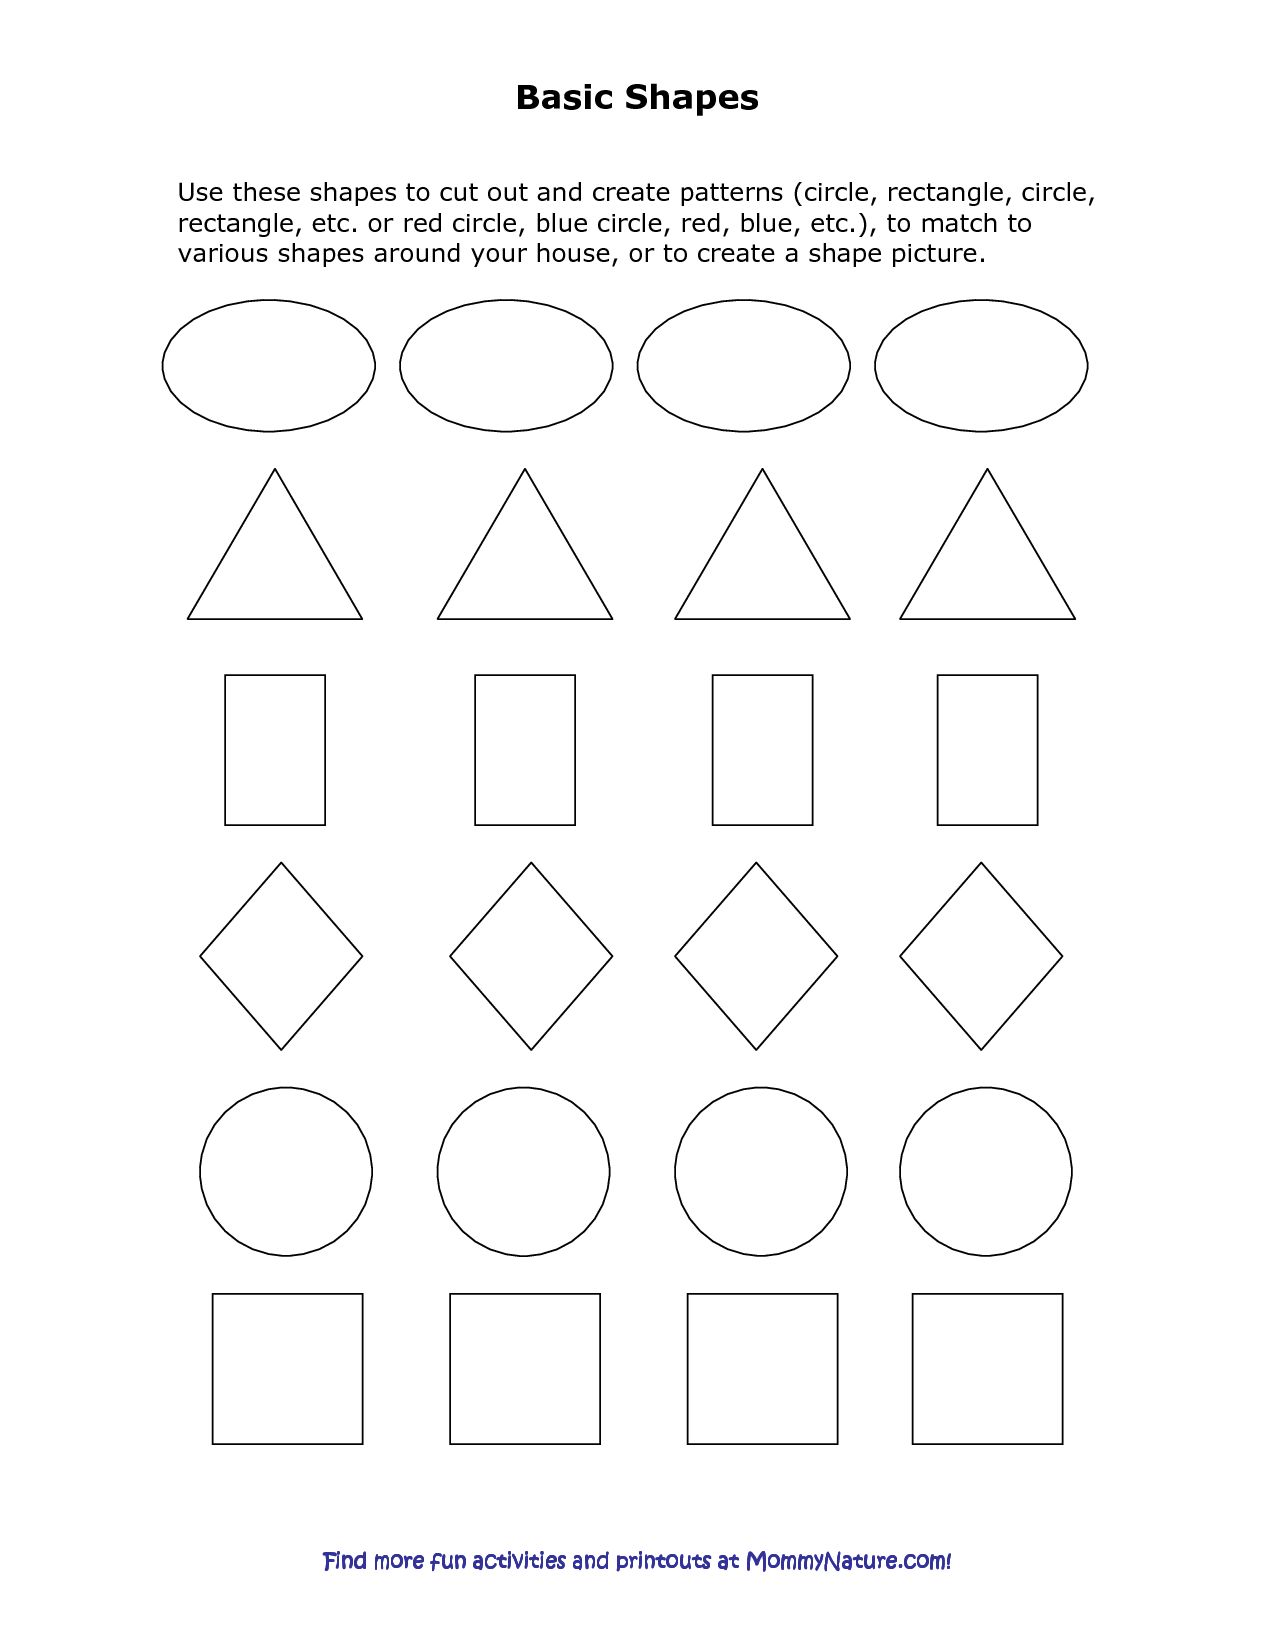 8-best-images-of-printable-shapes-cut-out-pattern-printable-heart-cut